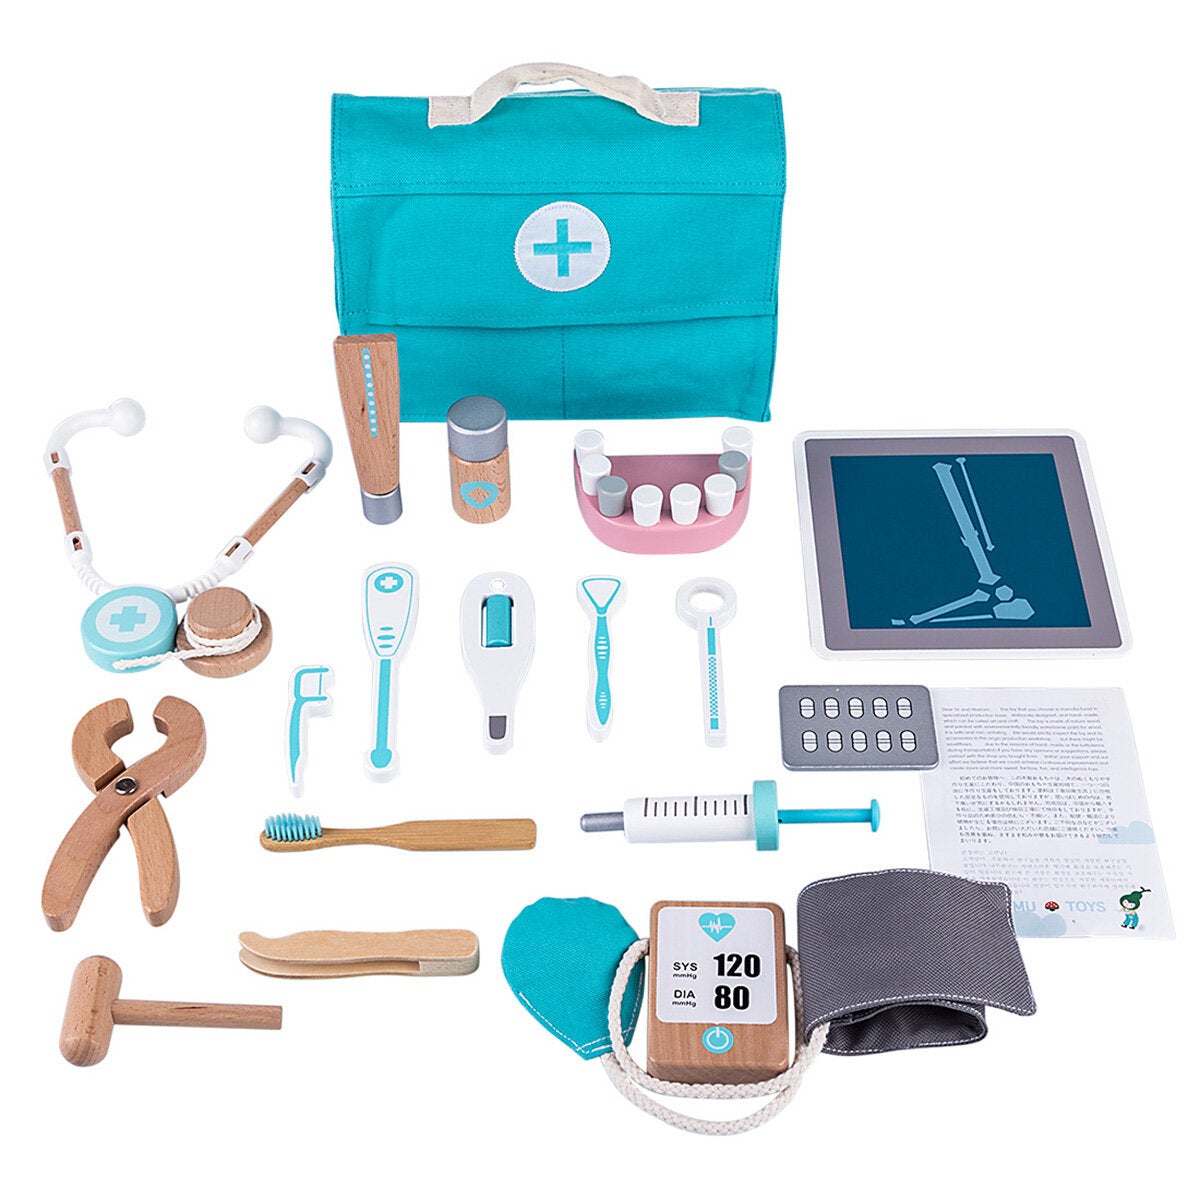 18 Pcs Children Wooden Role Play Pretend Dentist Toolbox Doctor Medical Playset with Stethoscope Early Education Toy